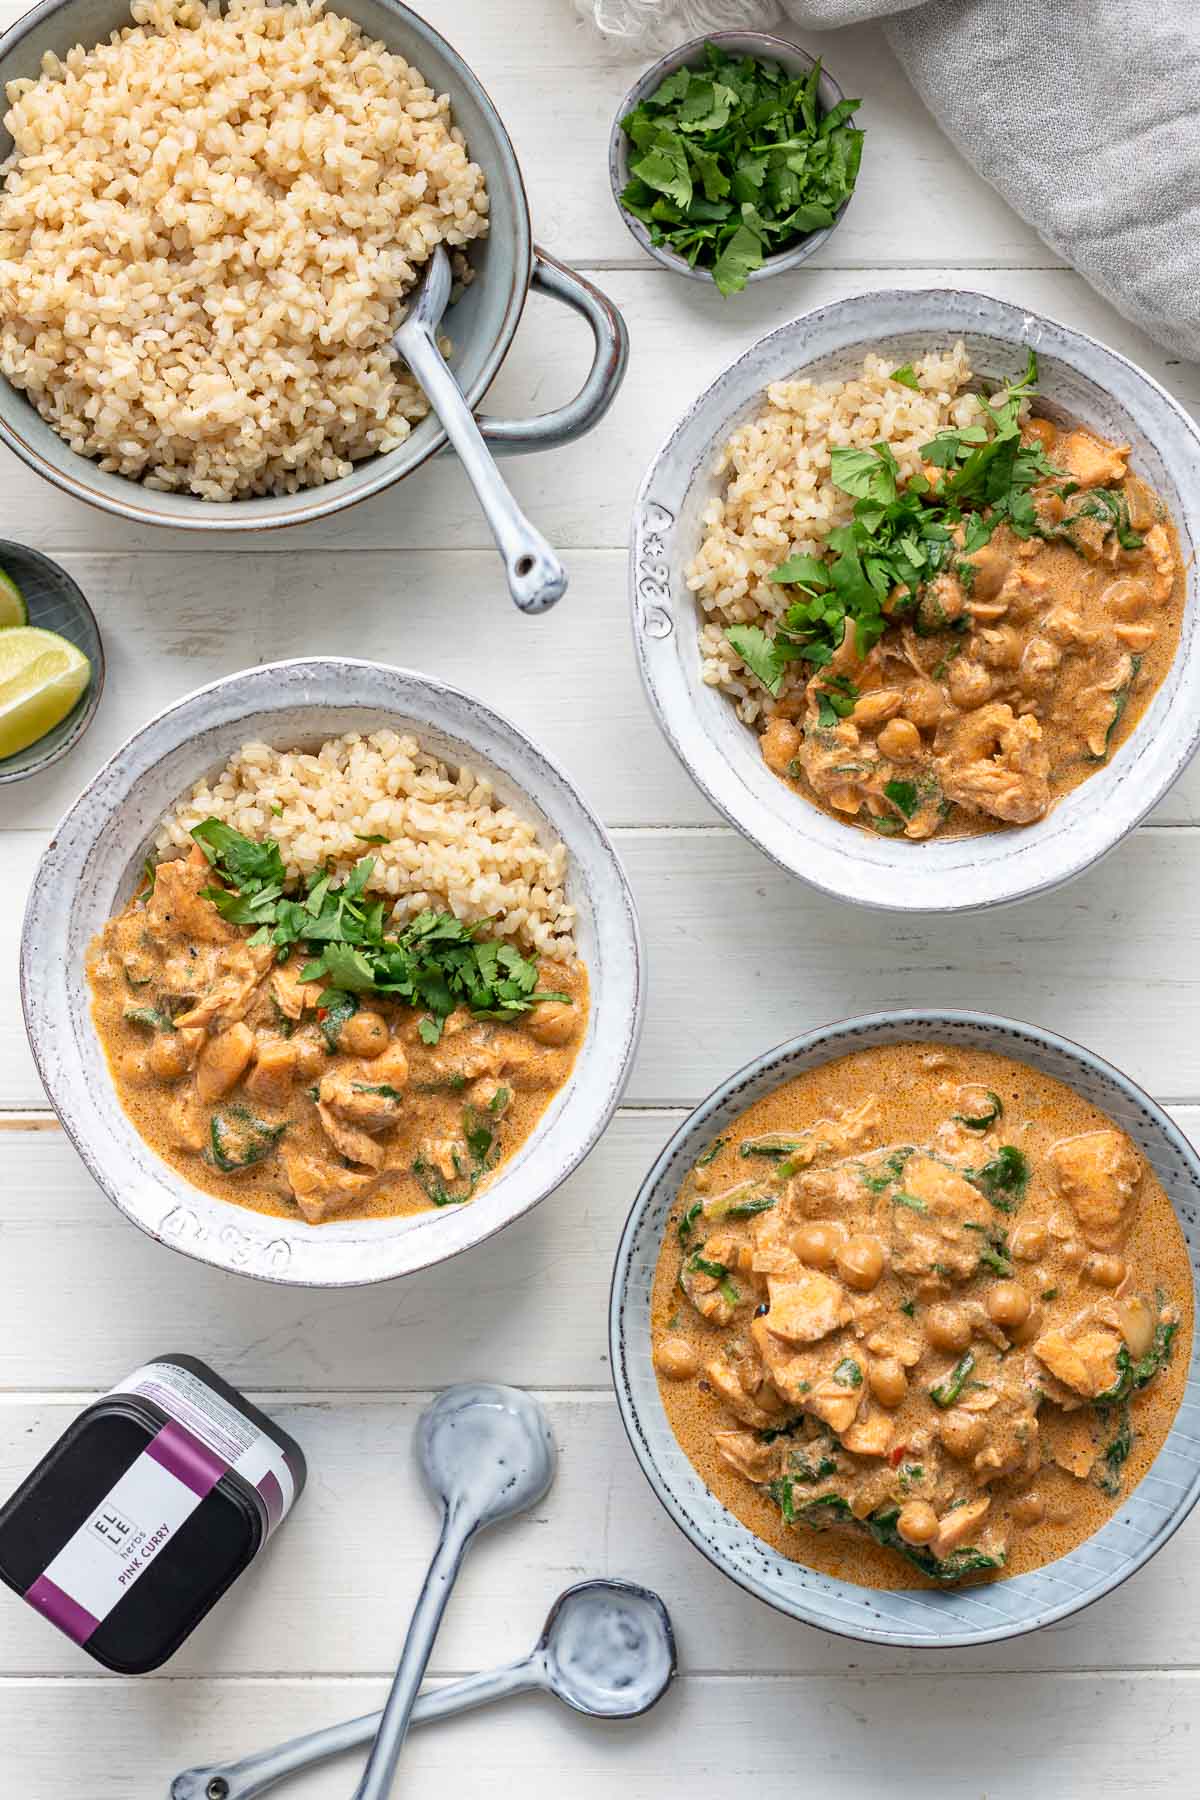 Salmon Coconut Curry with Spinach and Chickpeas